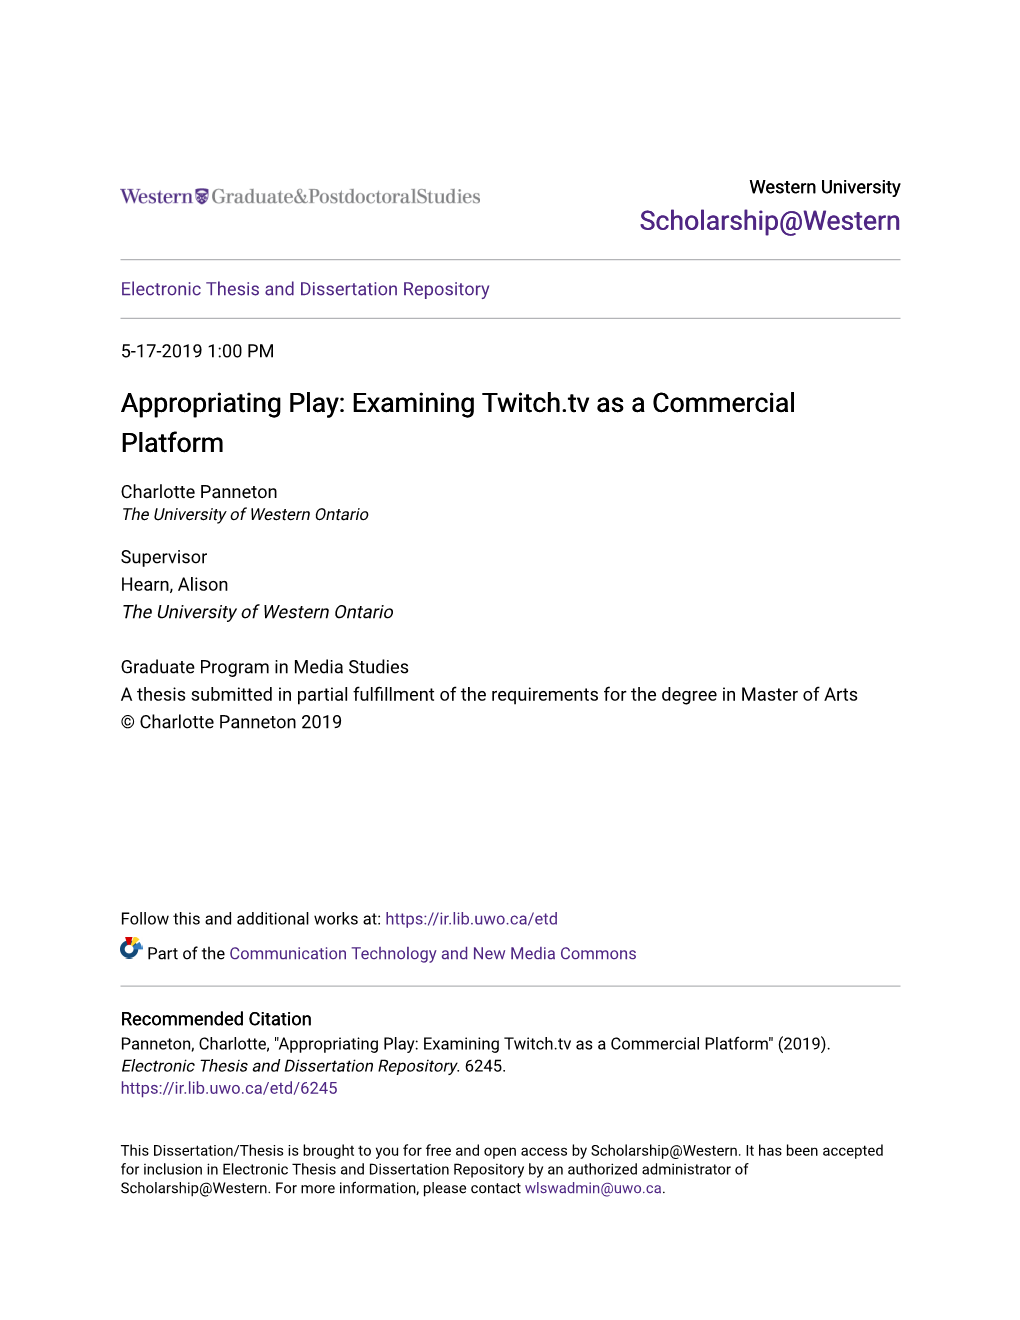 Appropriating Play: Examining Twitch.Tv As a Commercial Platform